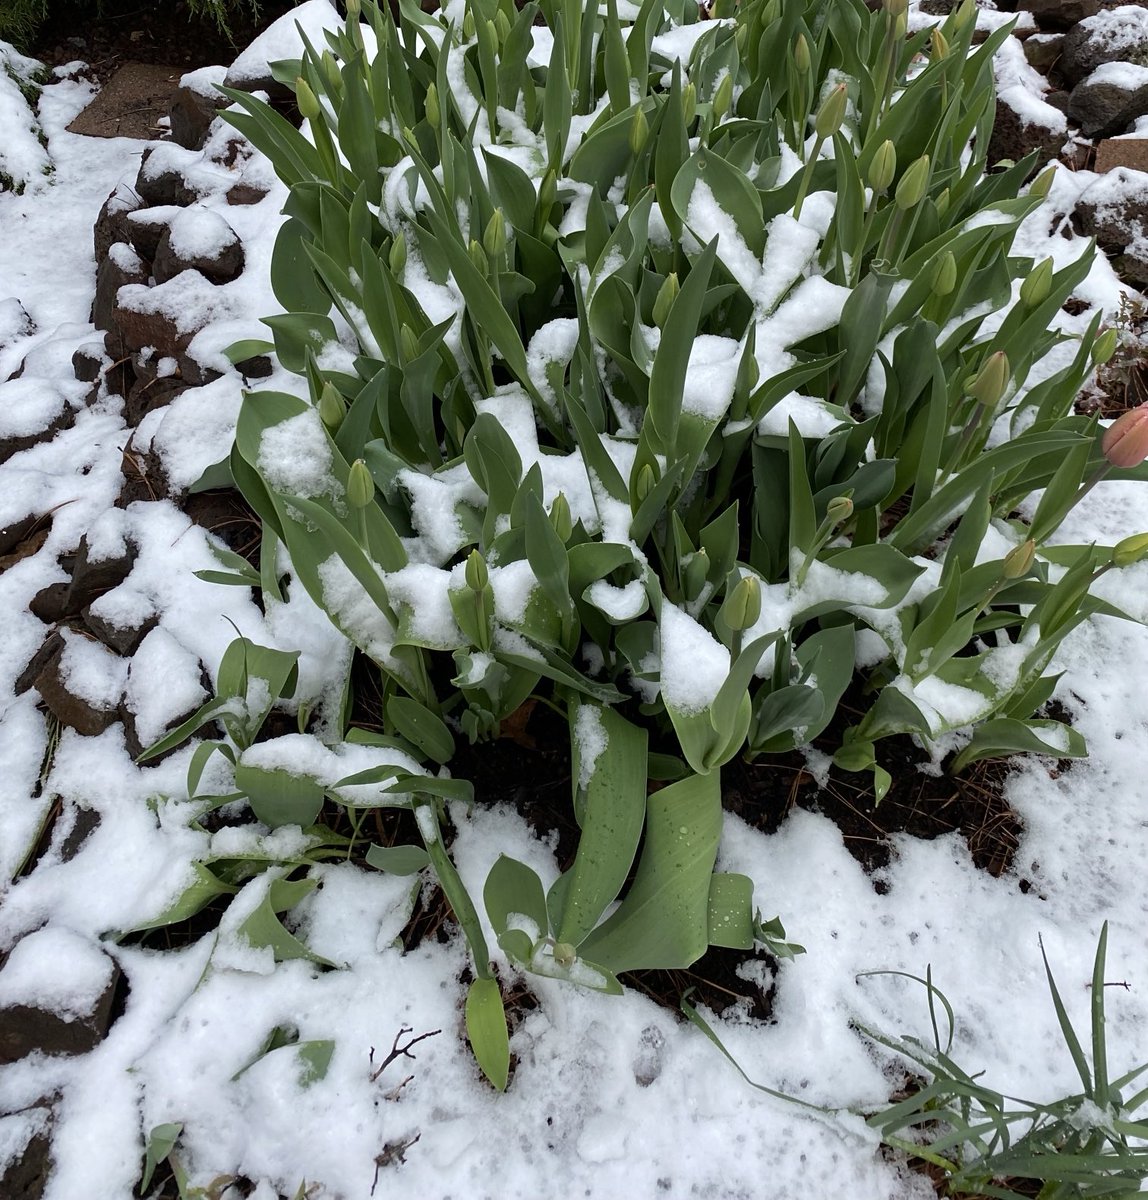 Snow on the tulips this morning